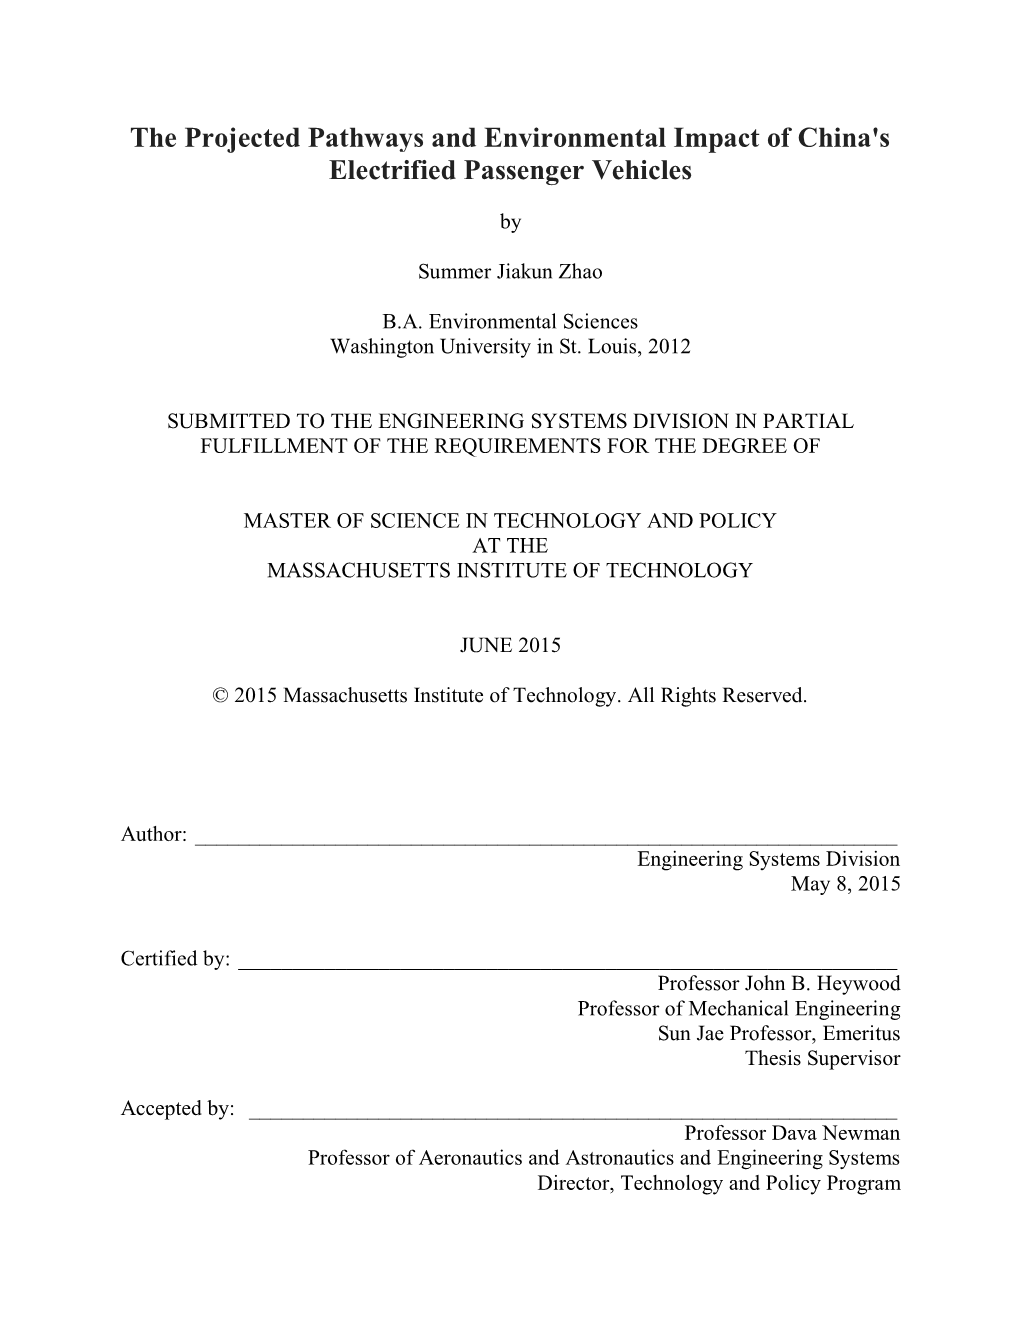 The Projected Pathways and Environmental Impact of China's Electrified Passenger Vehicles